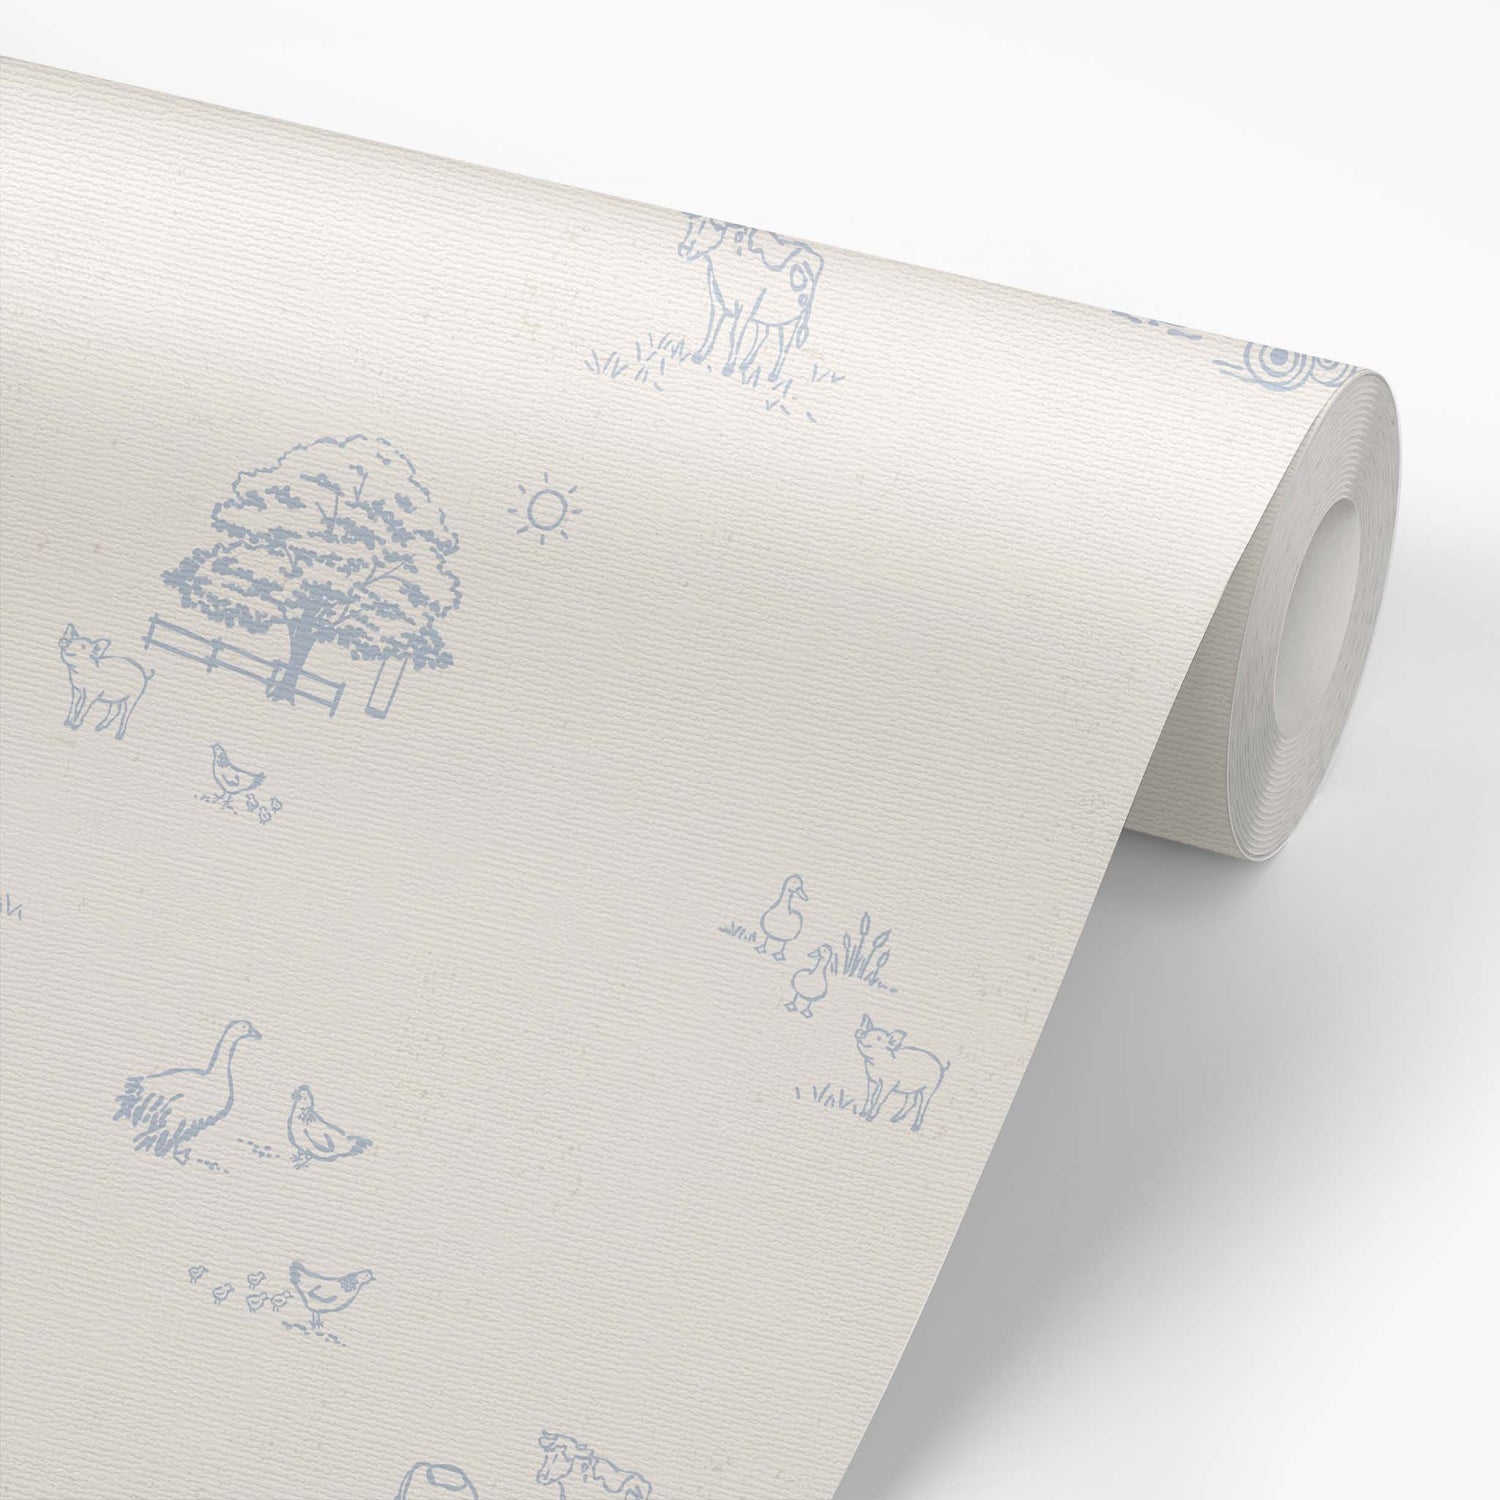 This wallpaper roll shows our Country Farm Wallpaper in Blue. This peel and stick, removable wallpaper was designed by artist Mariah Cottrell and features farm animals and trees in a countryside scene.